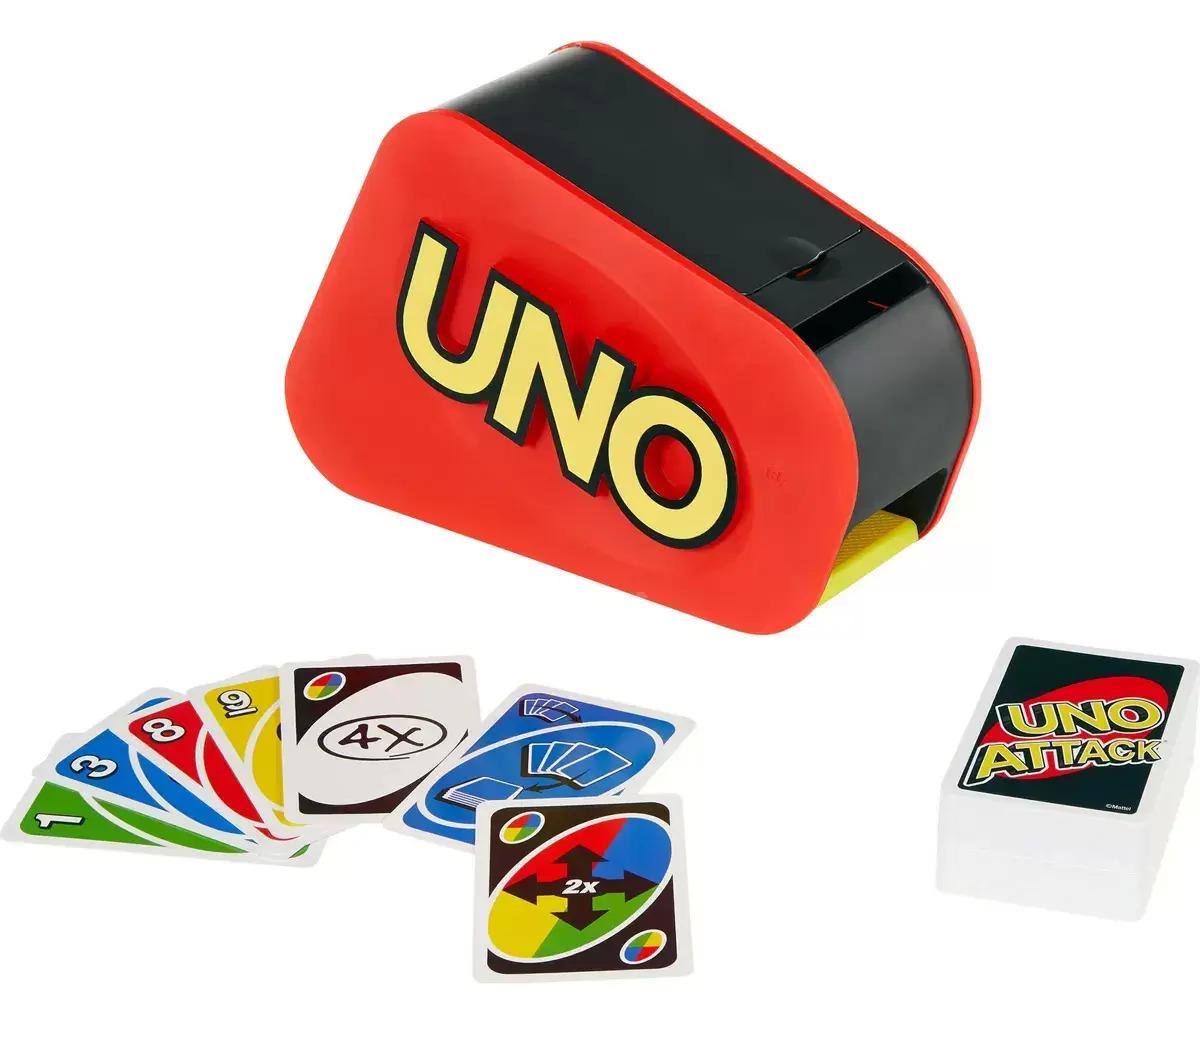 UNO Attack Card Game for Family Night with Card Launcher for $10